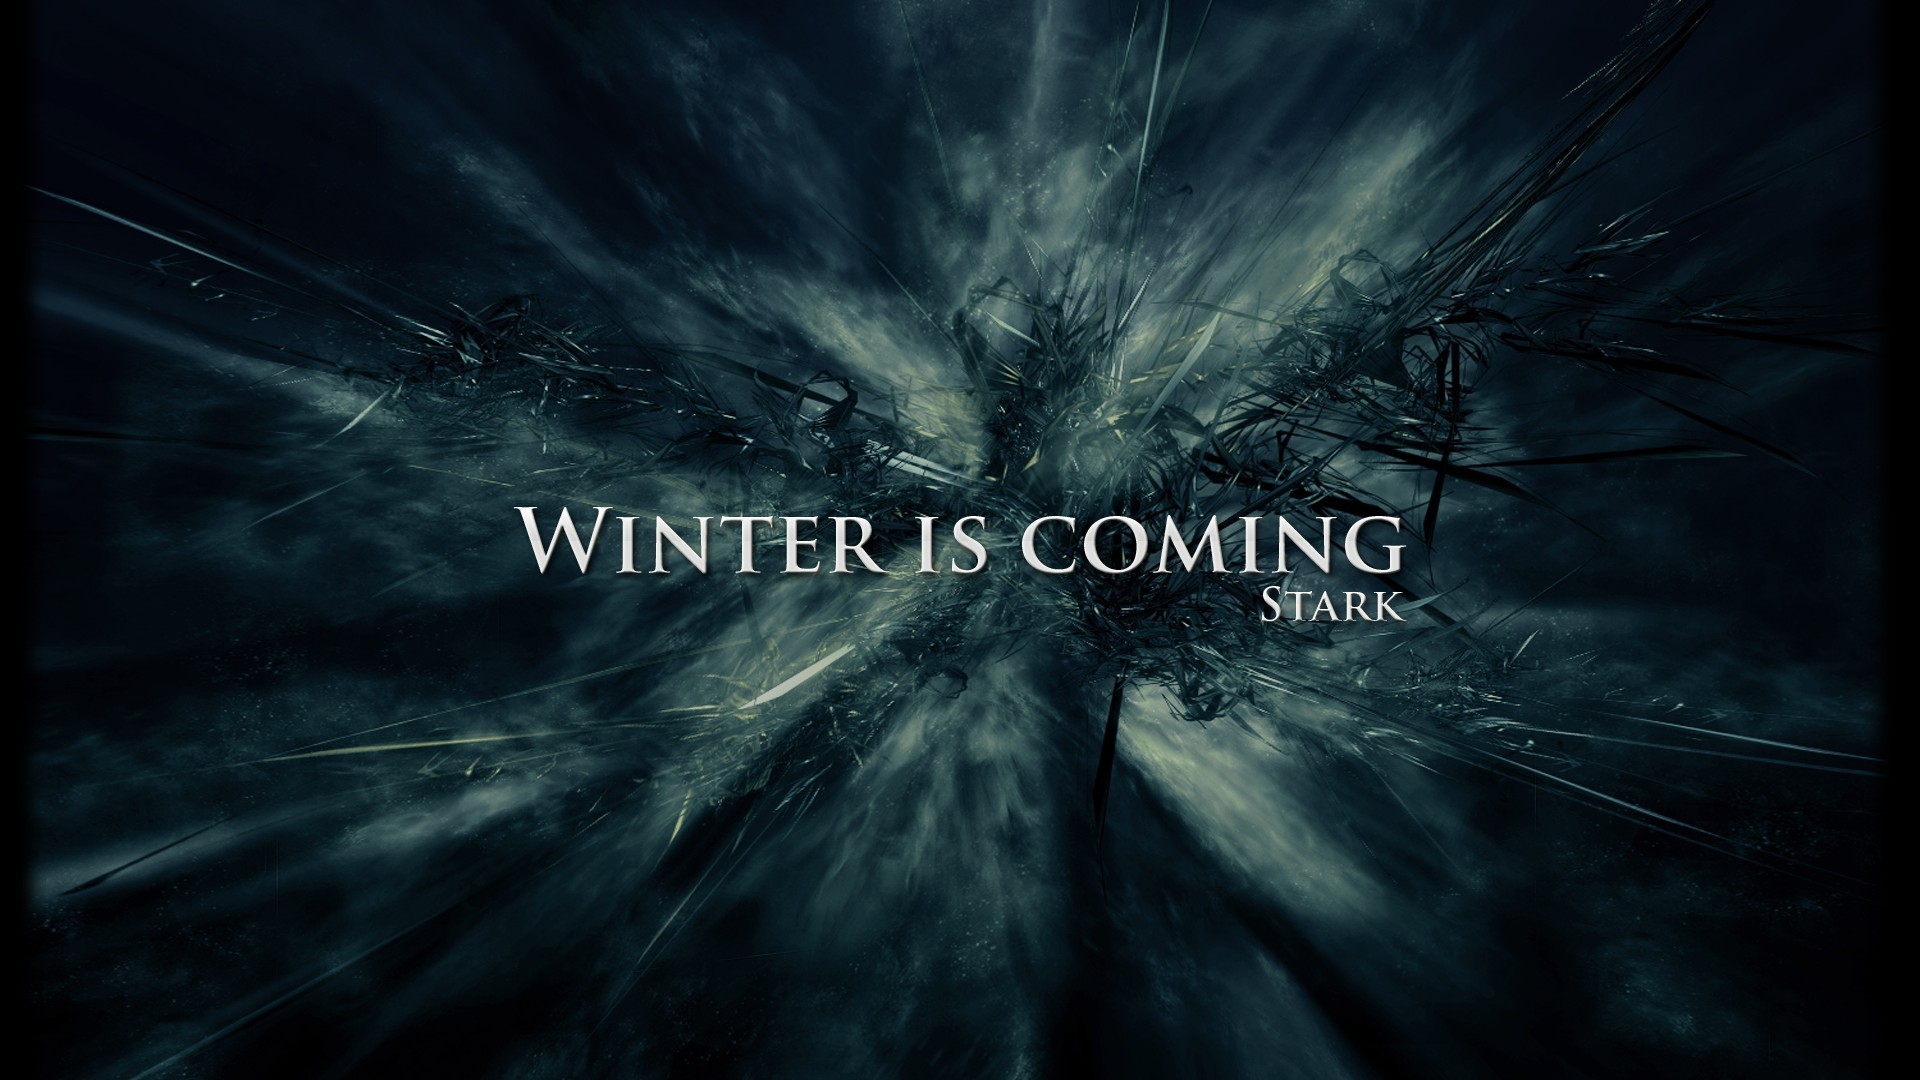 General 1920x1080 Game of Thrones A Song of Ice and Fire House Stark Winter Is Coming TV series